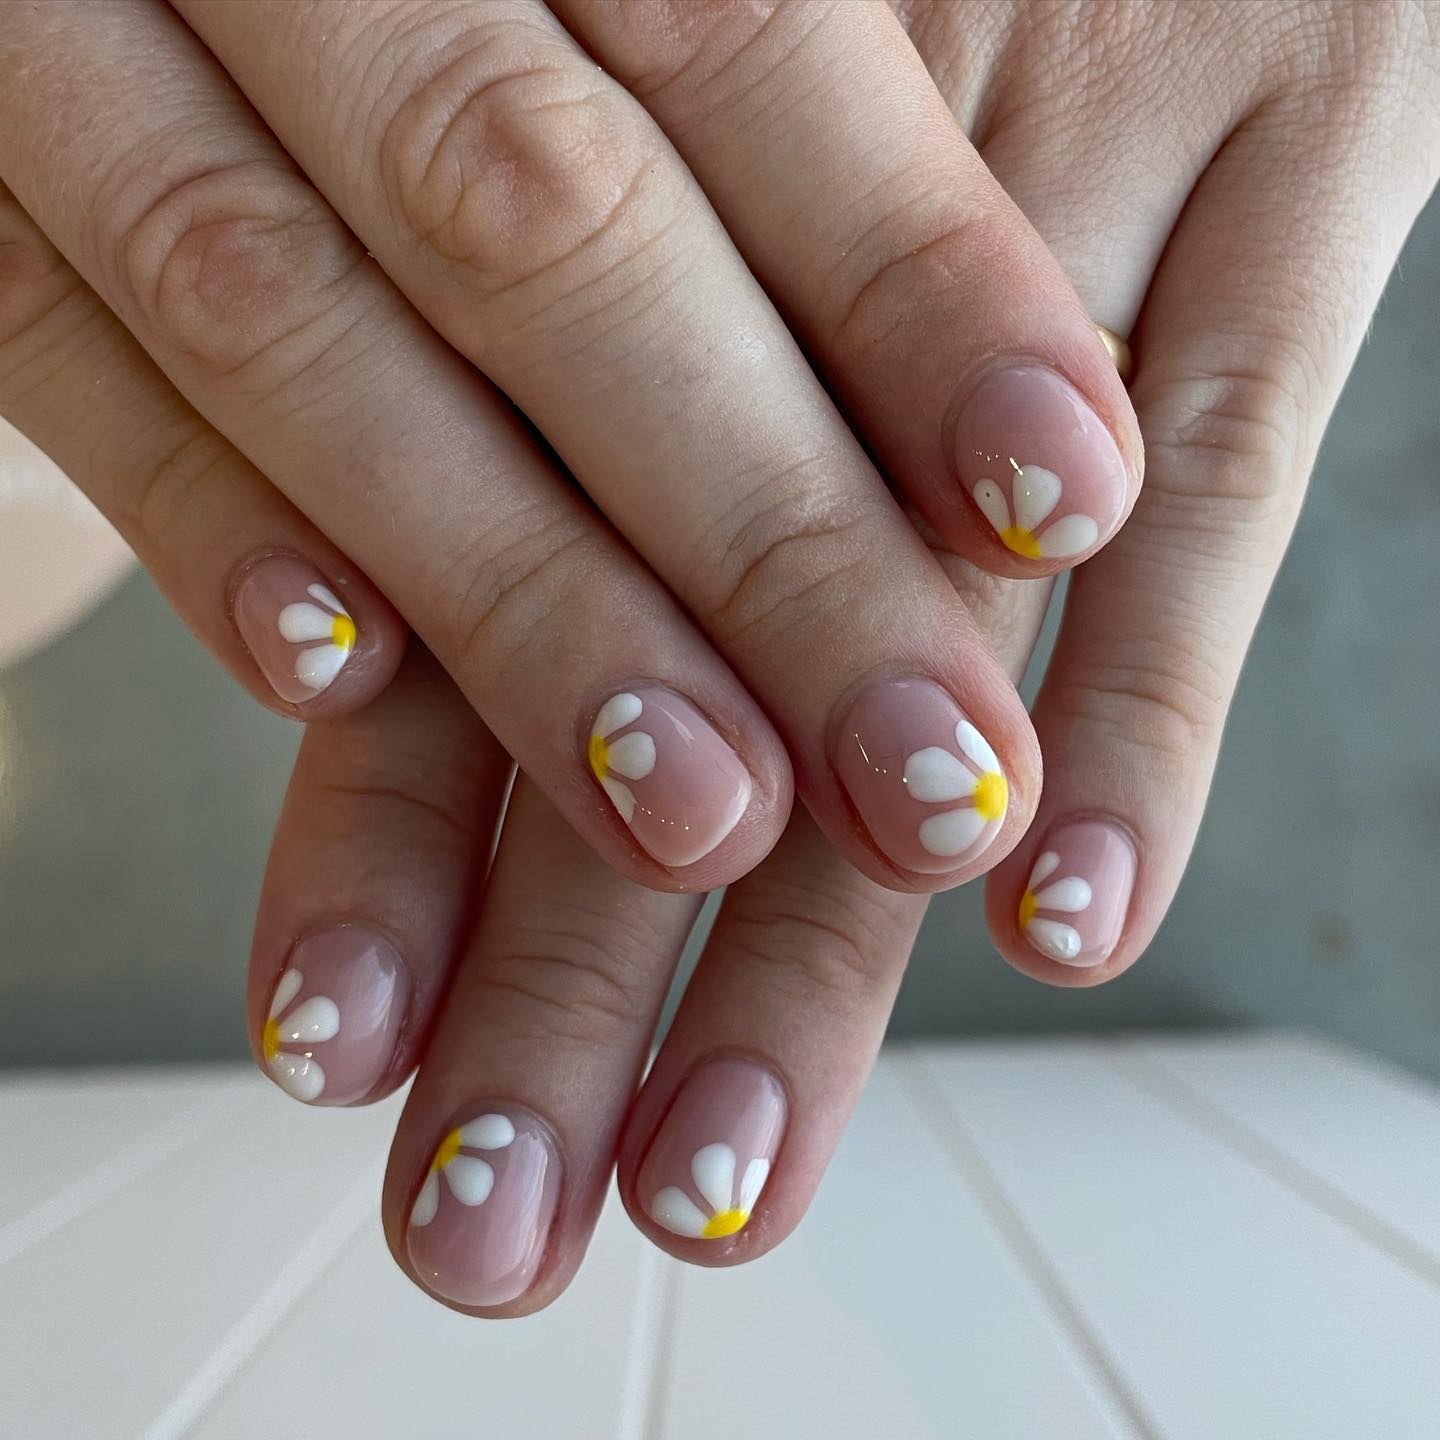 It's a pretty simple and chic nail design. All you need is to apply a nude nail polish to your nails and draw half daisies on them.